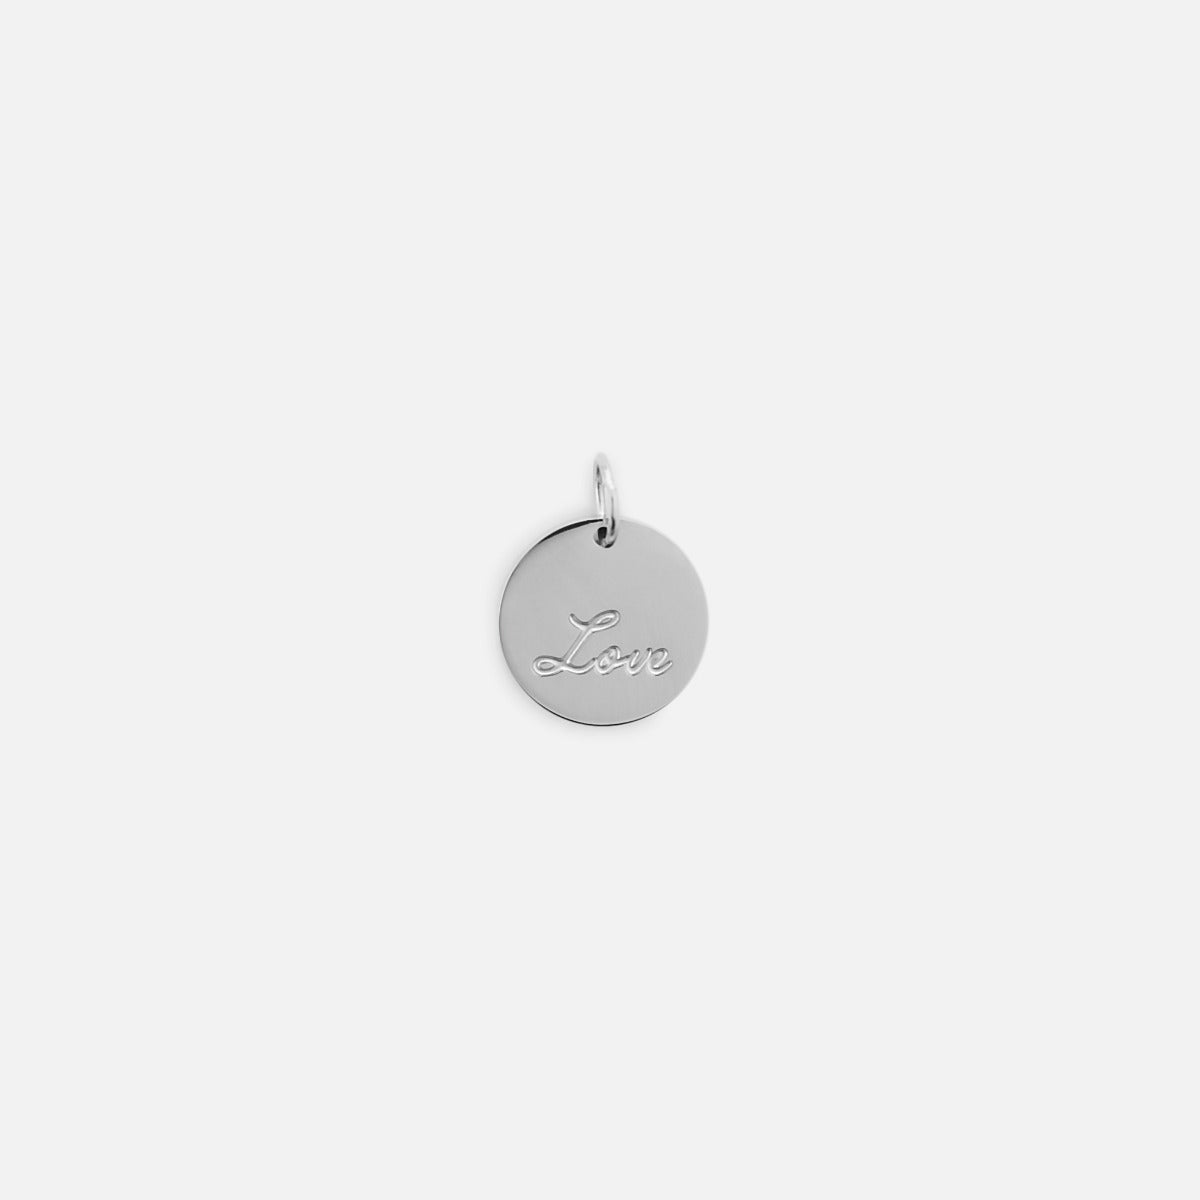 Small symbolic silvered charm engraved "love" wording 